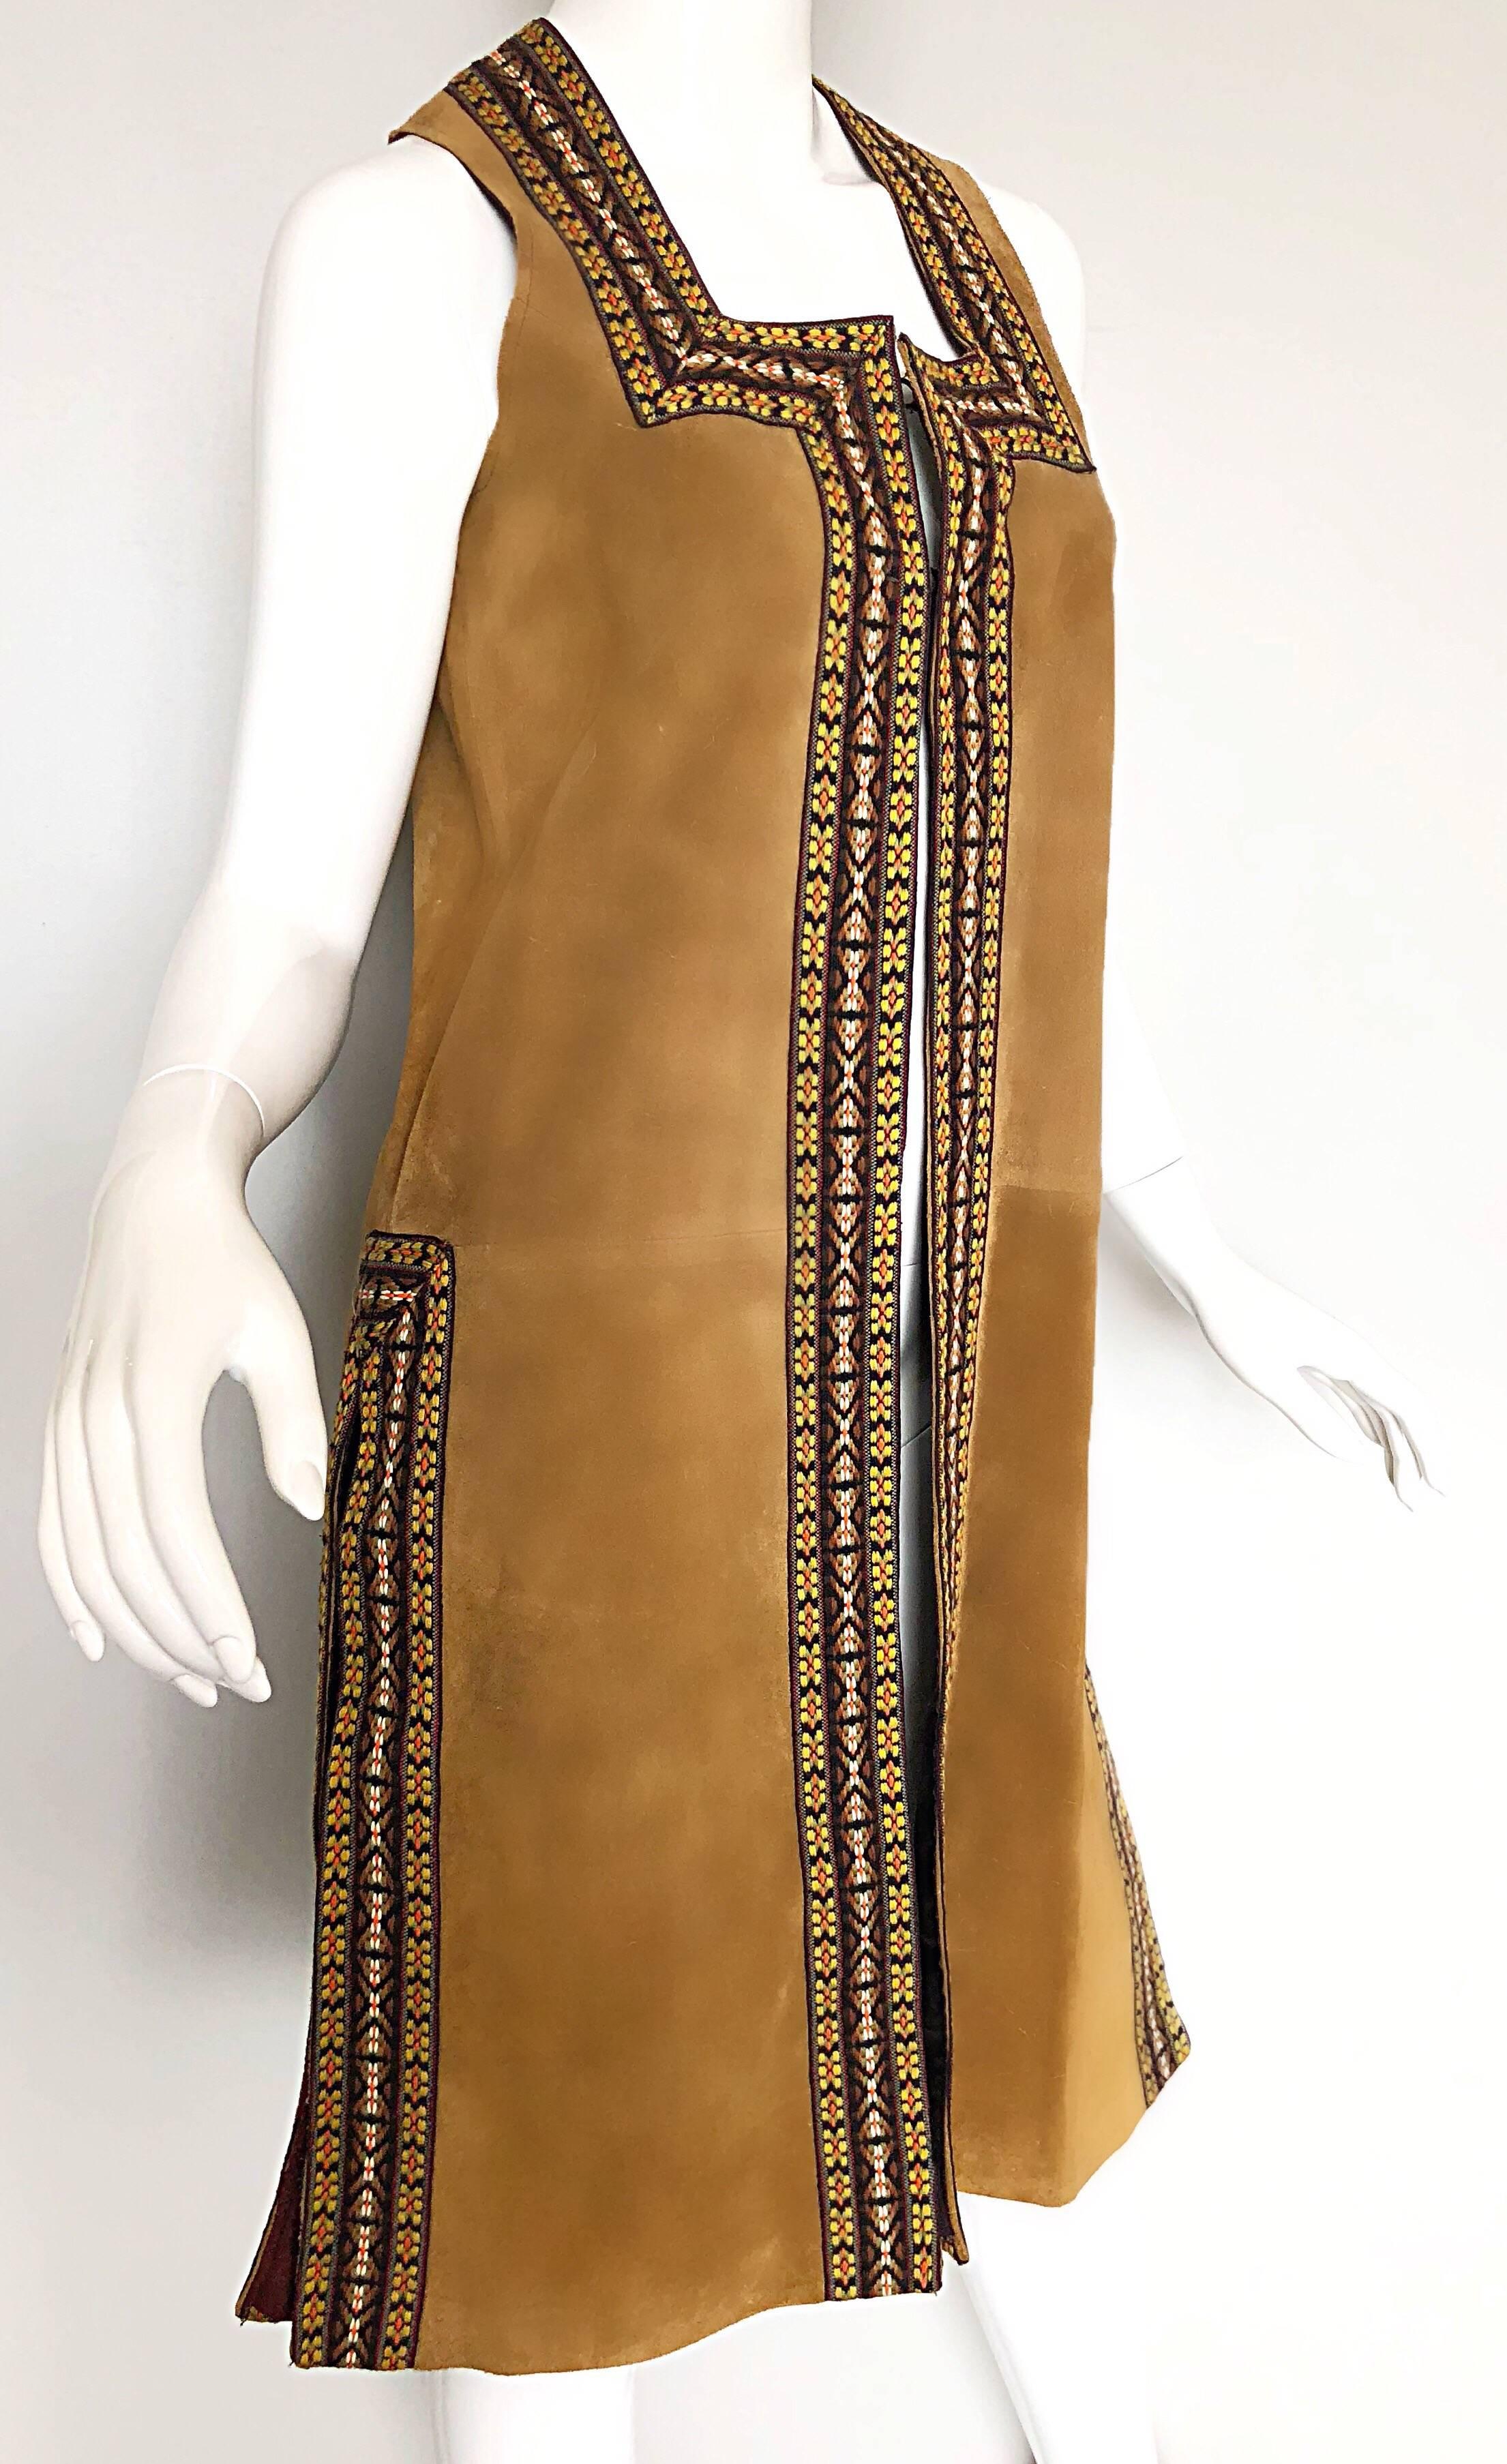 Chic 1970s Tan Suede Leather Embroidered 70s Vintage Boho Sleeveless Vest Jacket In Excellent Condition For Sale In San Diego, CA